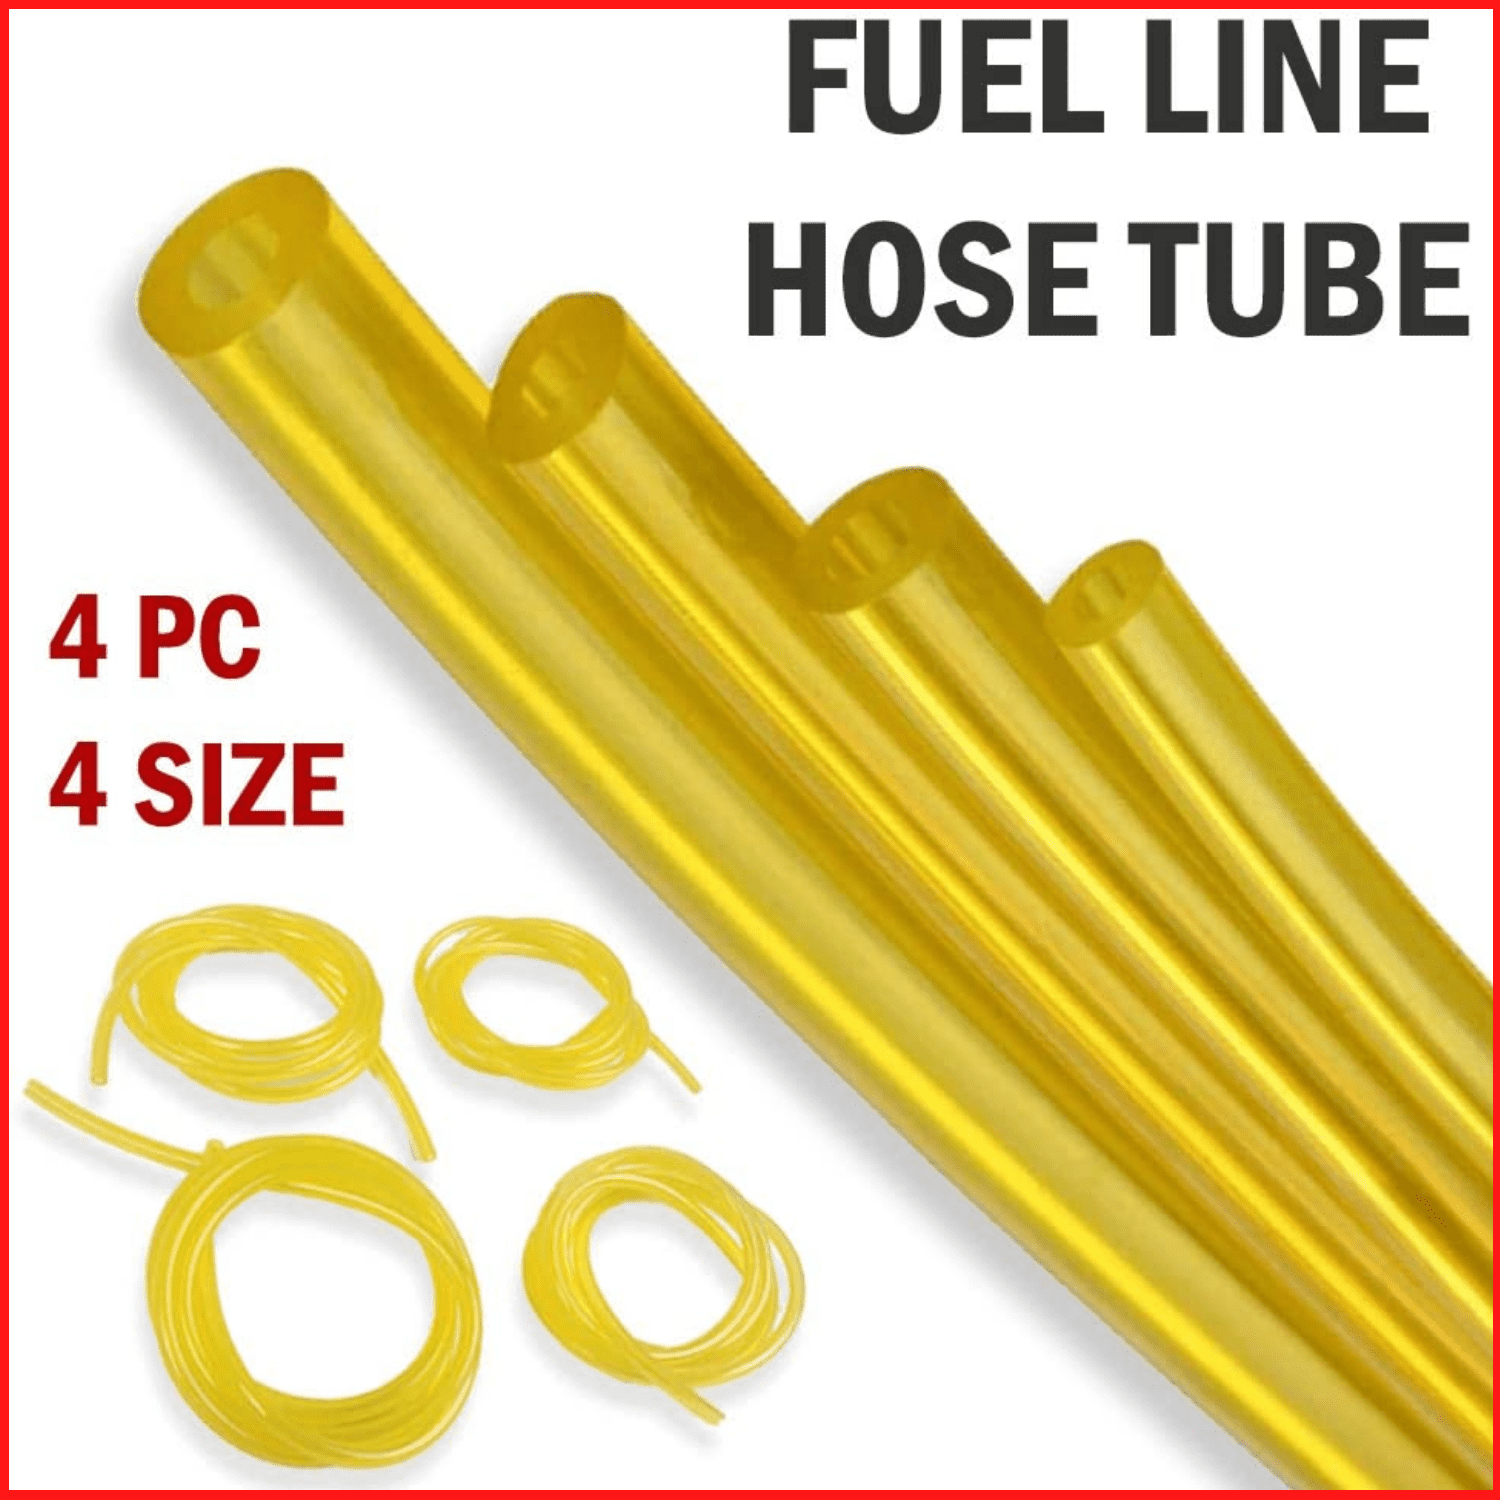 4x Fuel Gas Lines Pipe Hose Tube for Weed Eater Wacker Trimmer Chainsaw Blower